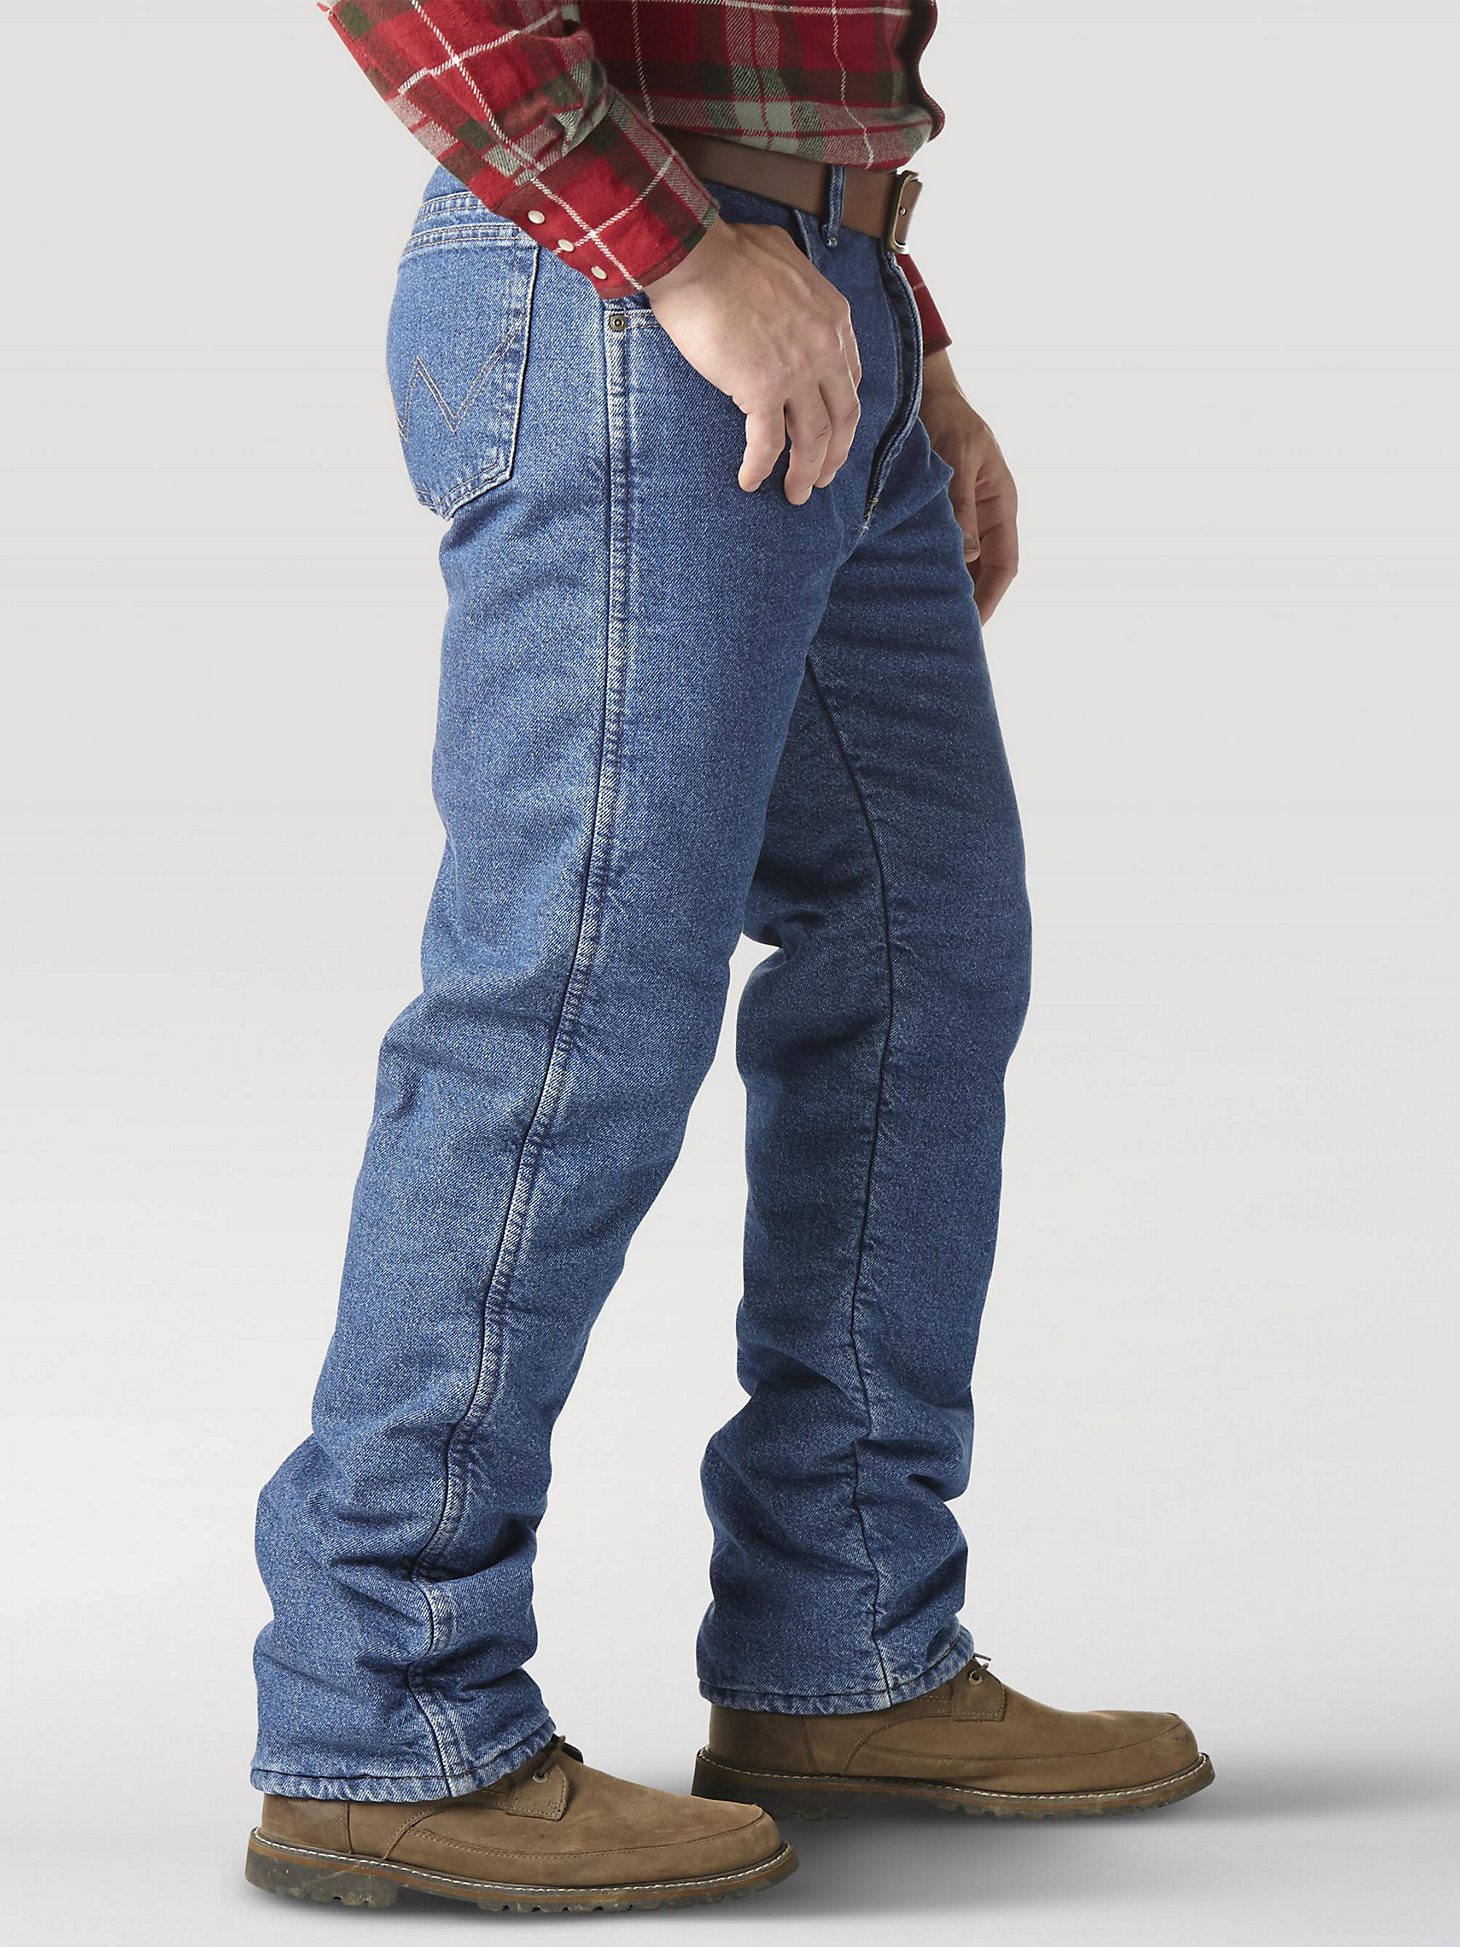 Wrangler Rugged Wear® Thermal Jean in Stonewashed alternative view 2